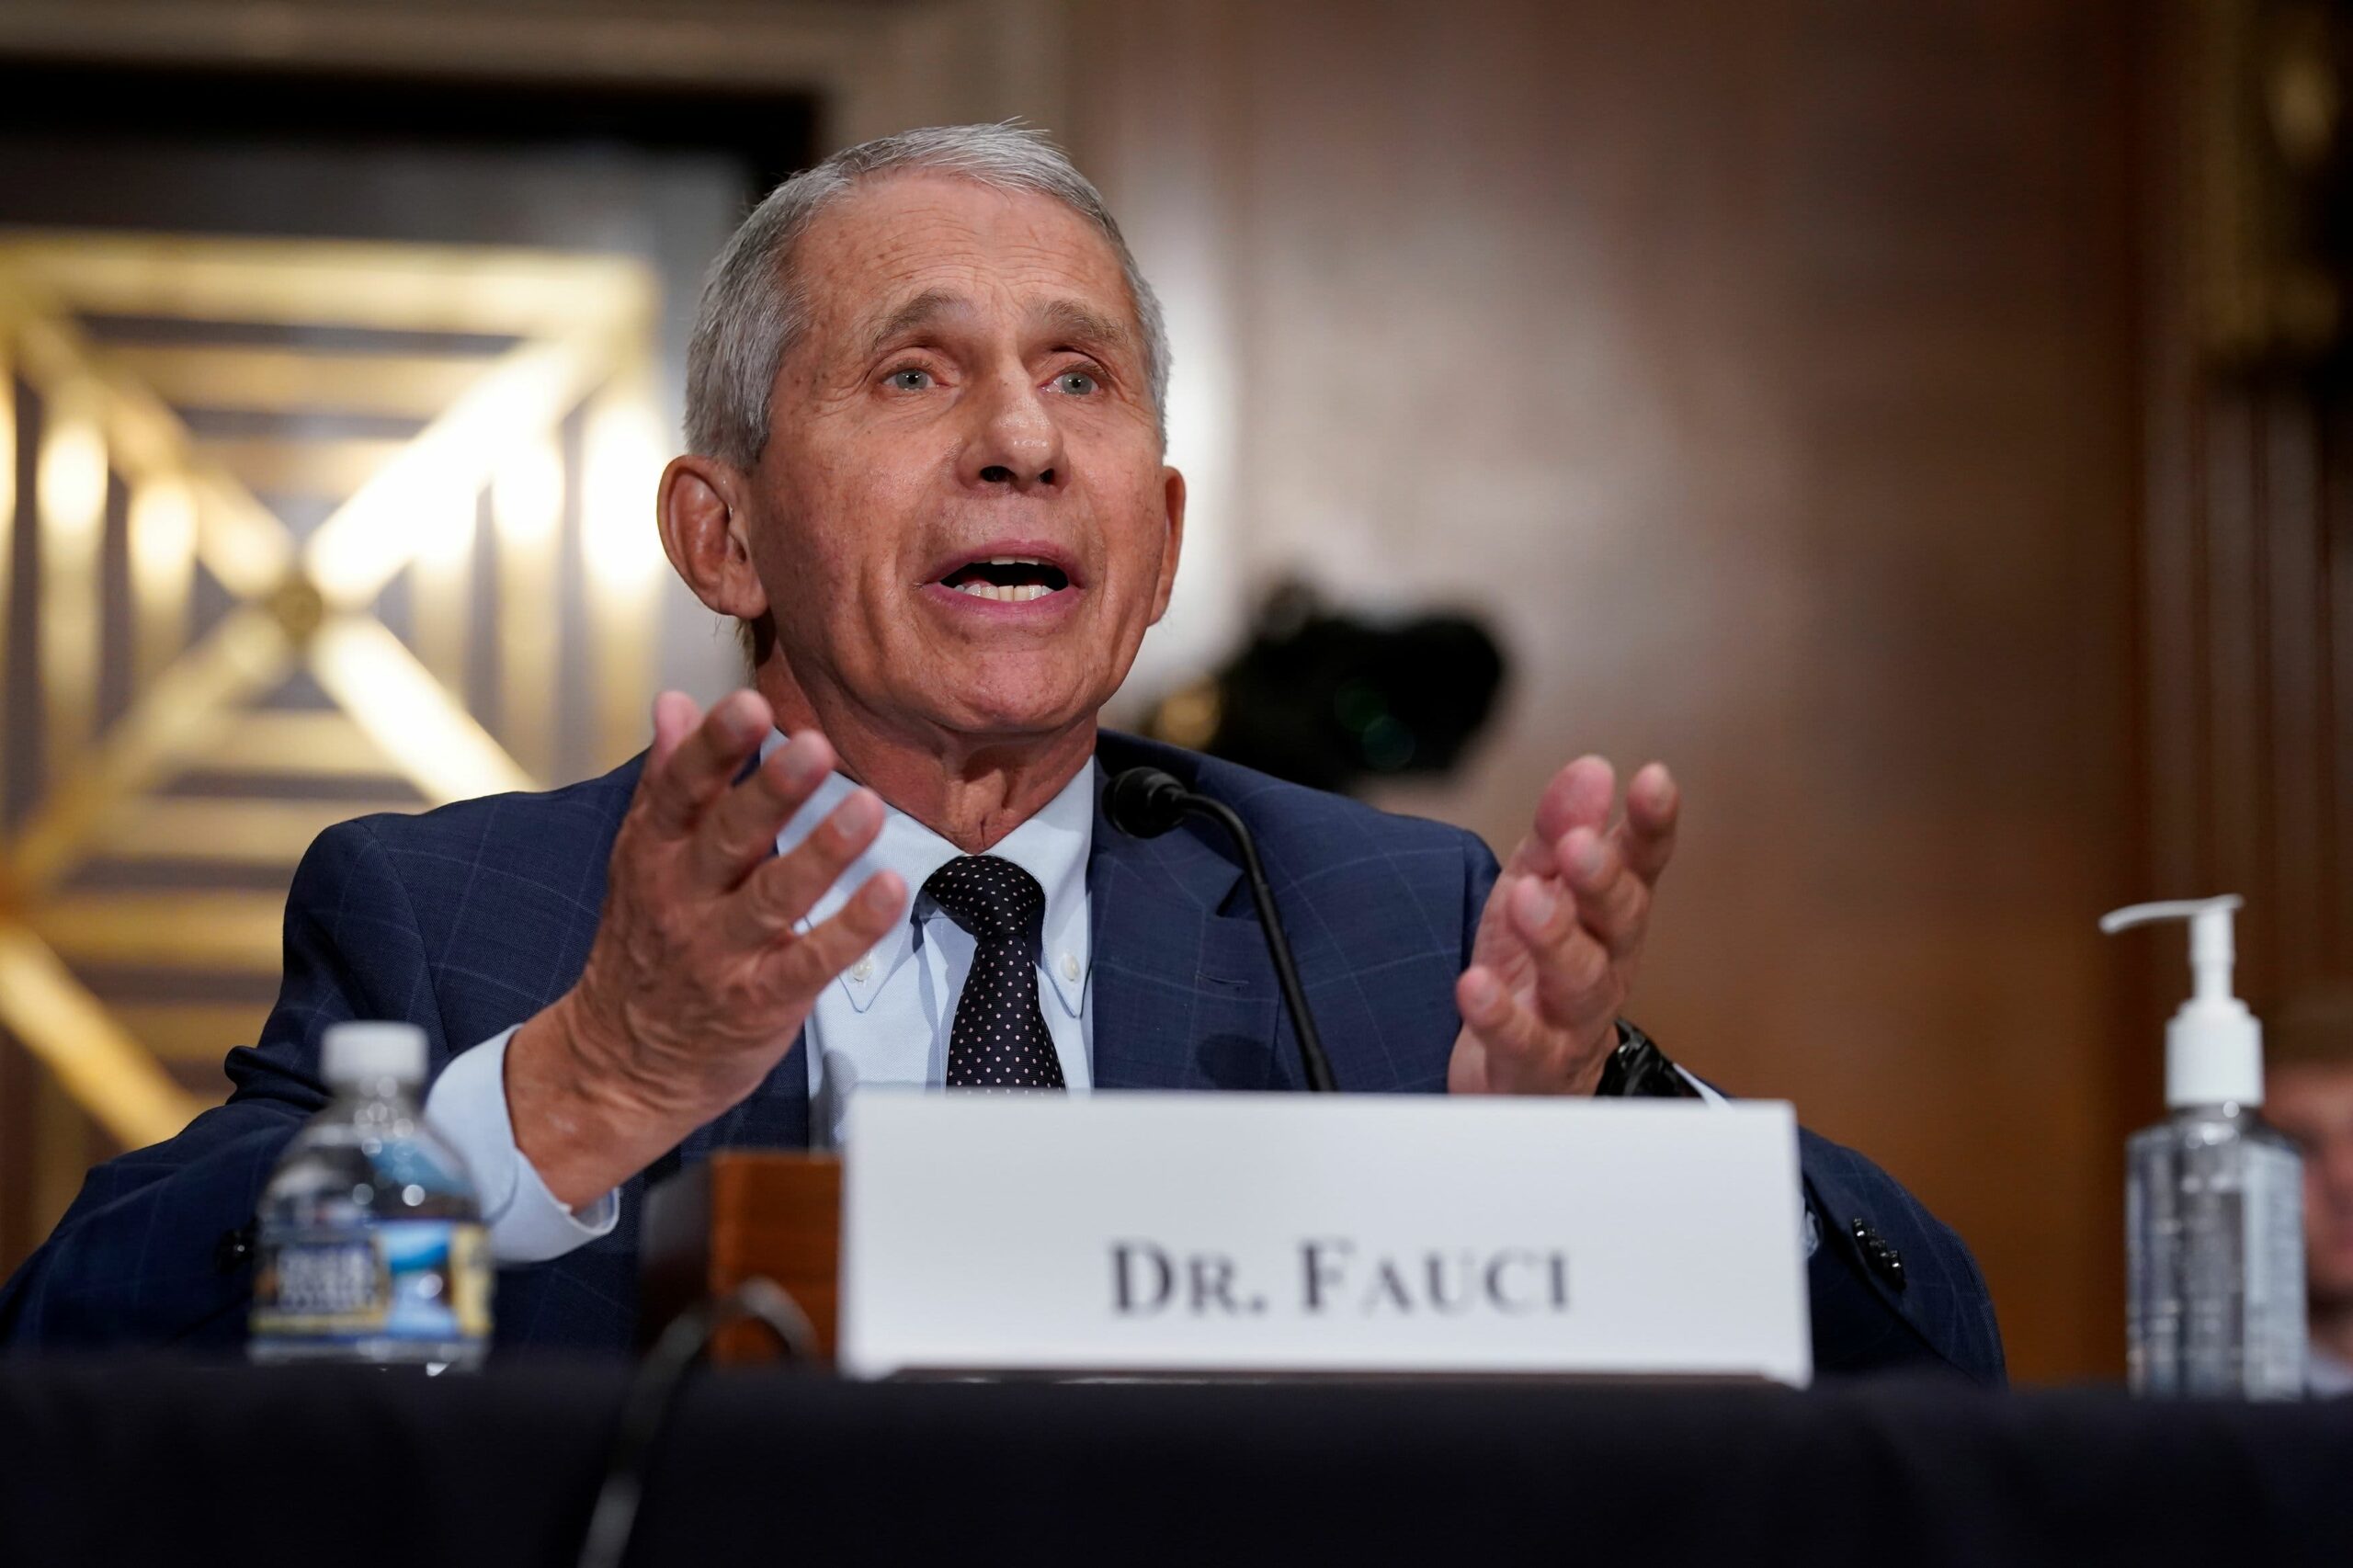 Pfizer Covid booster photographs seemingly prepared Sept. 20, Anthony Fauci says